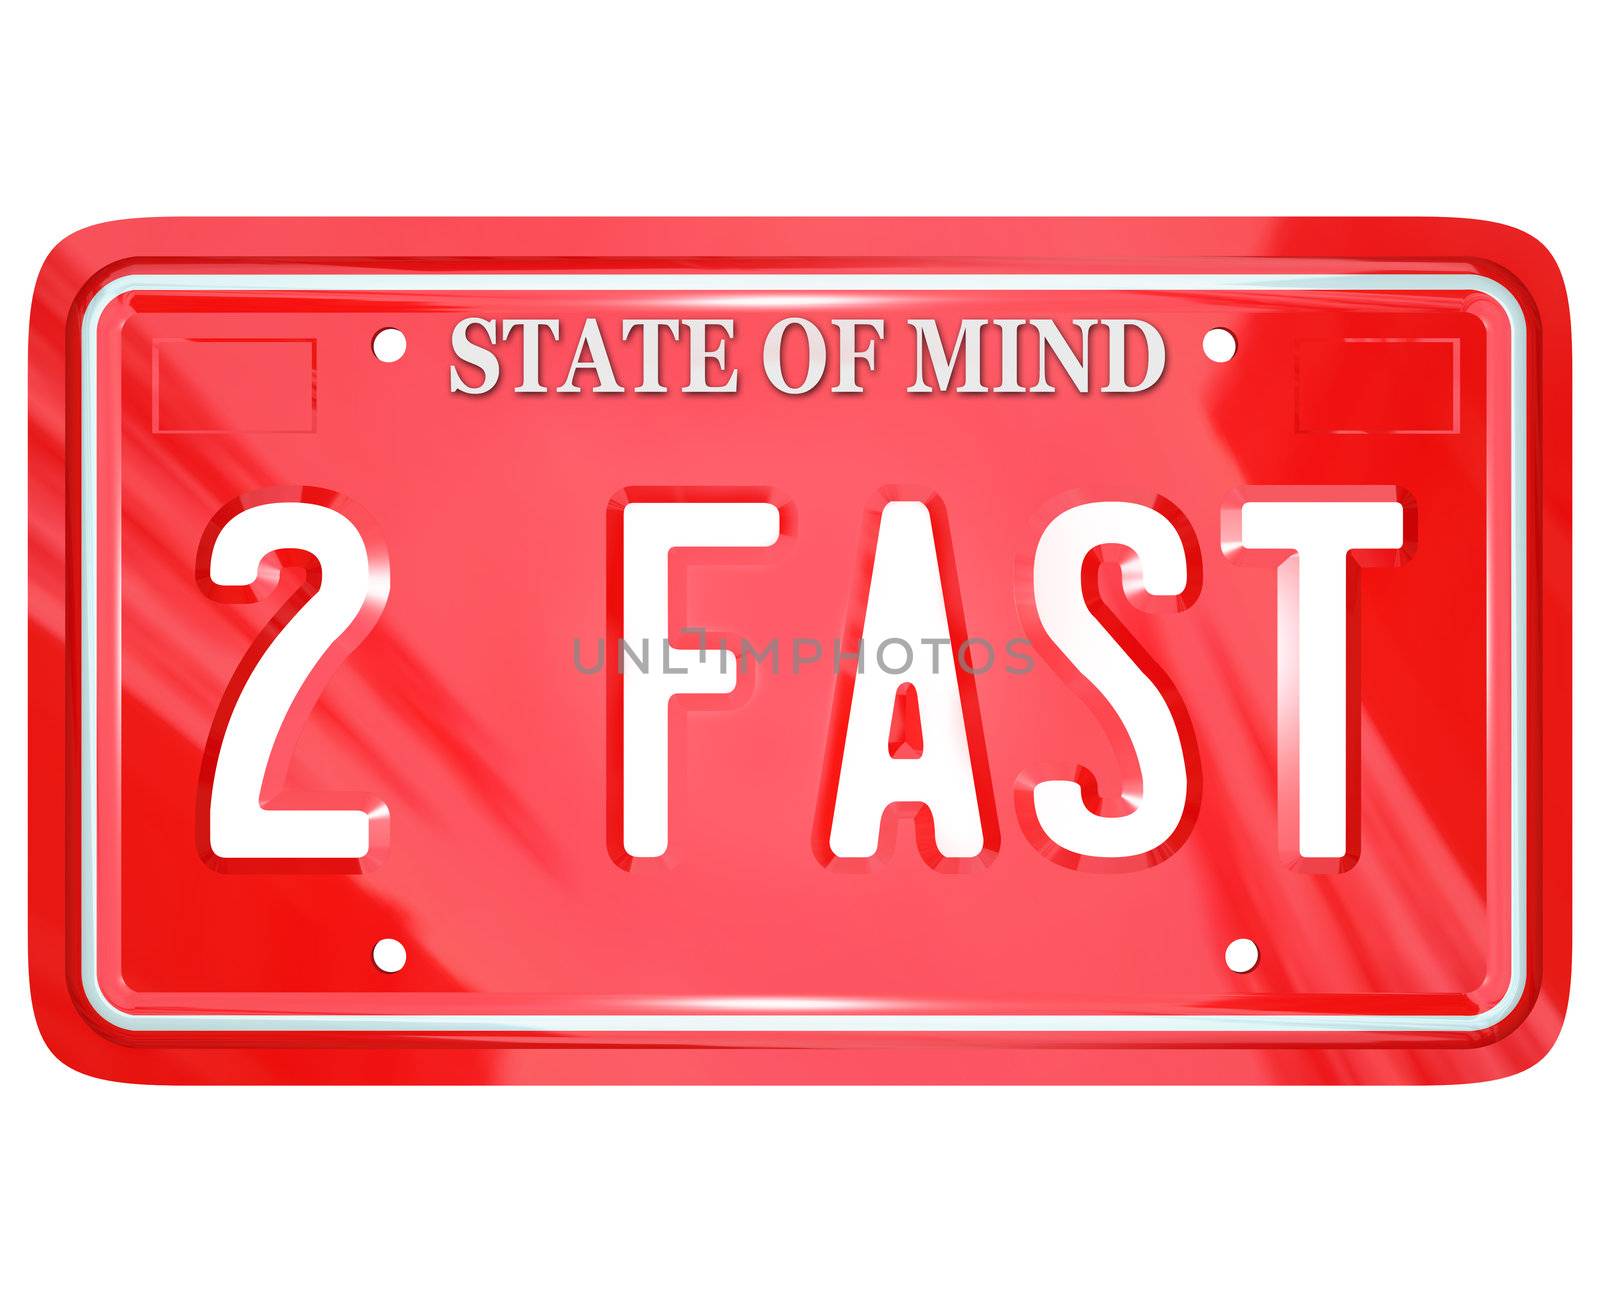 A red vanity license plate with the letters and words 2 Fast to symbolize a speedy driver or someone racing to beat his competition